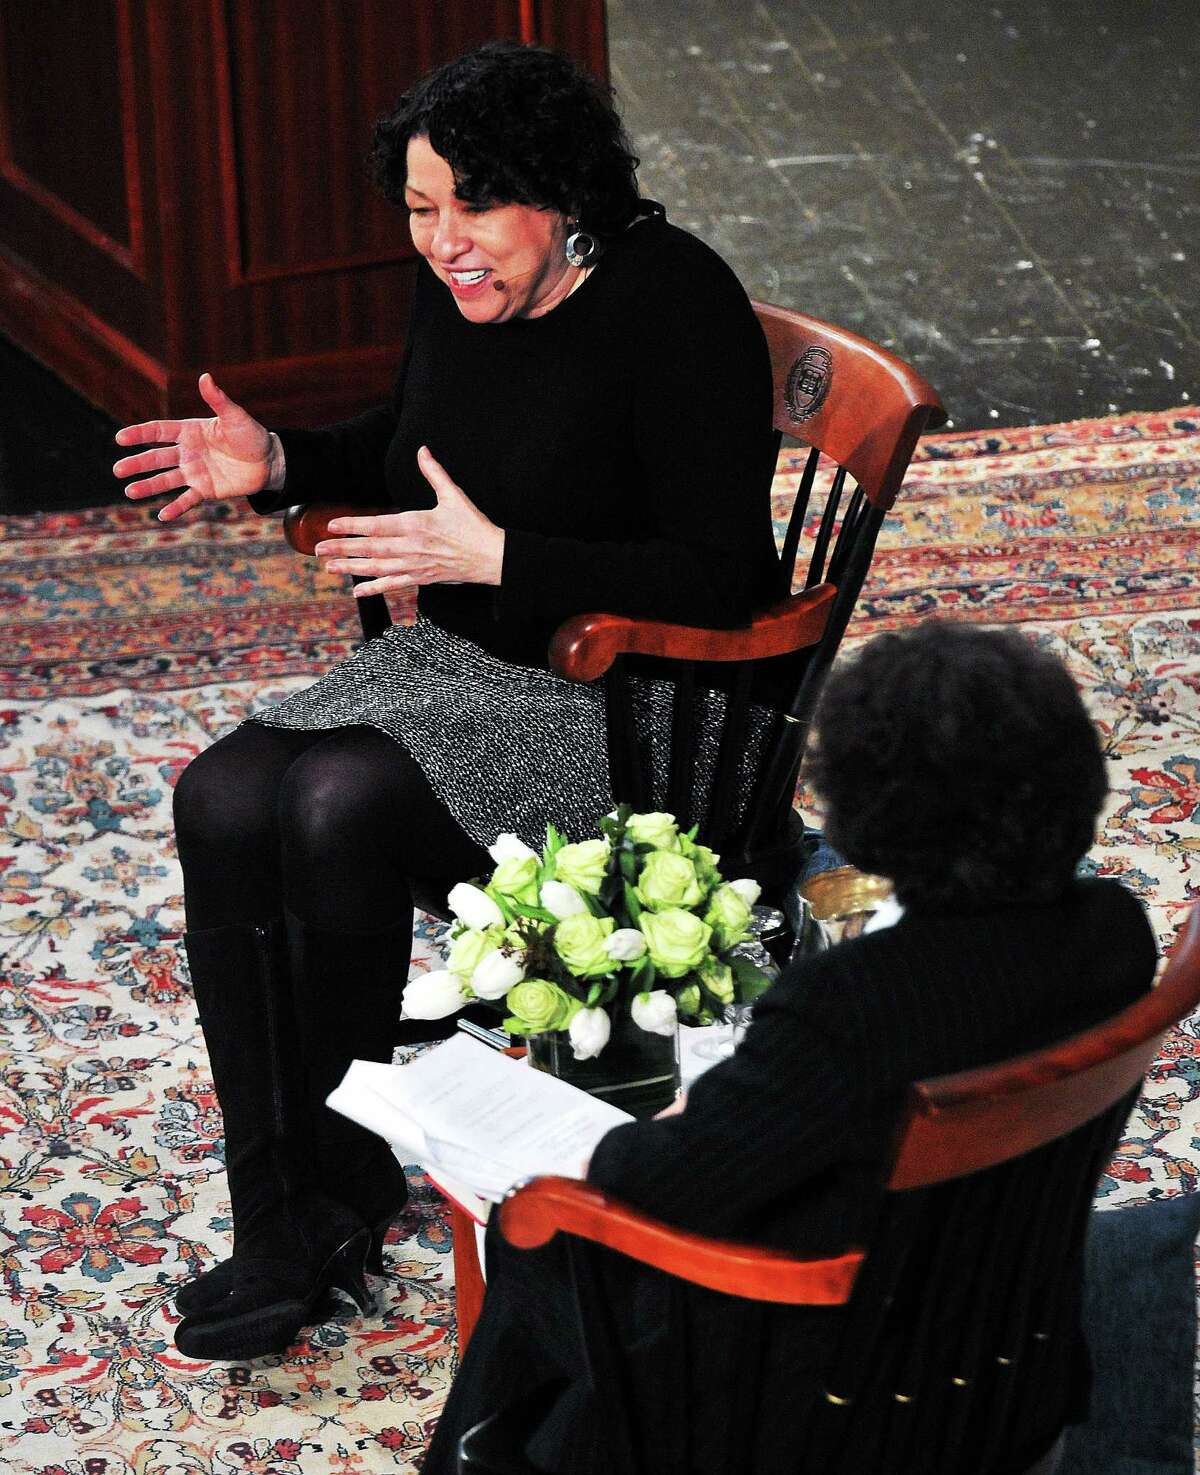 U.S. Supreme Court Justice Sonia Sotomayor, left, talks with Yale Professor Judith Resnik on stage at Yale’s Woolsey Hall.